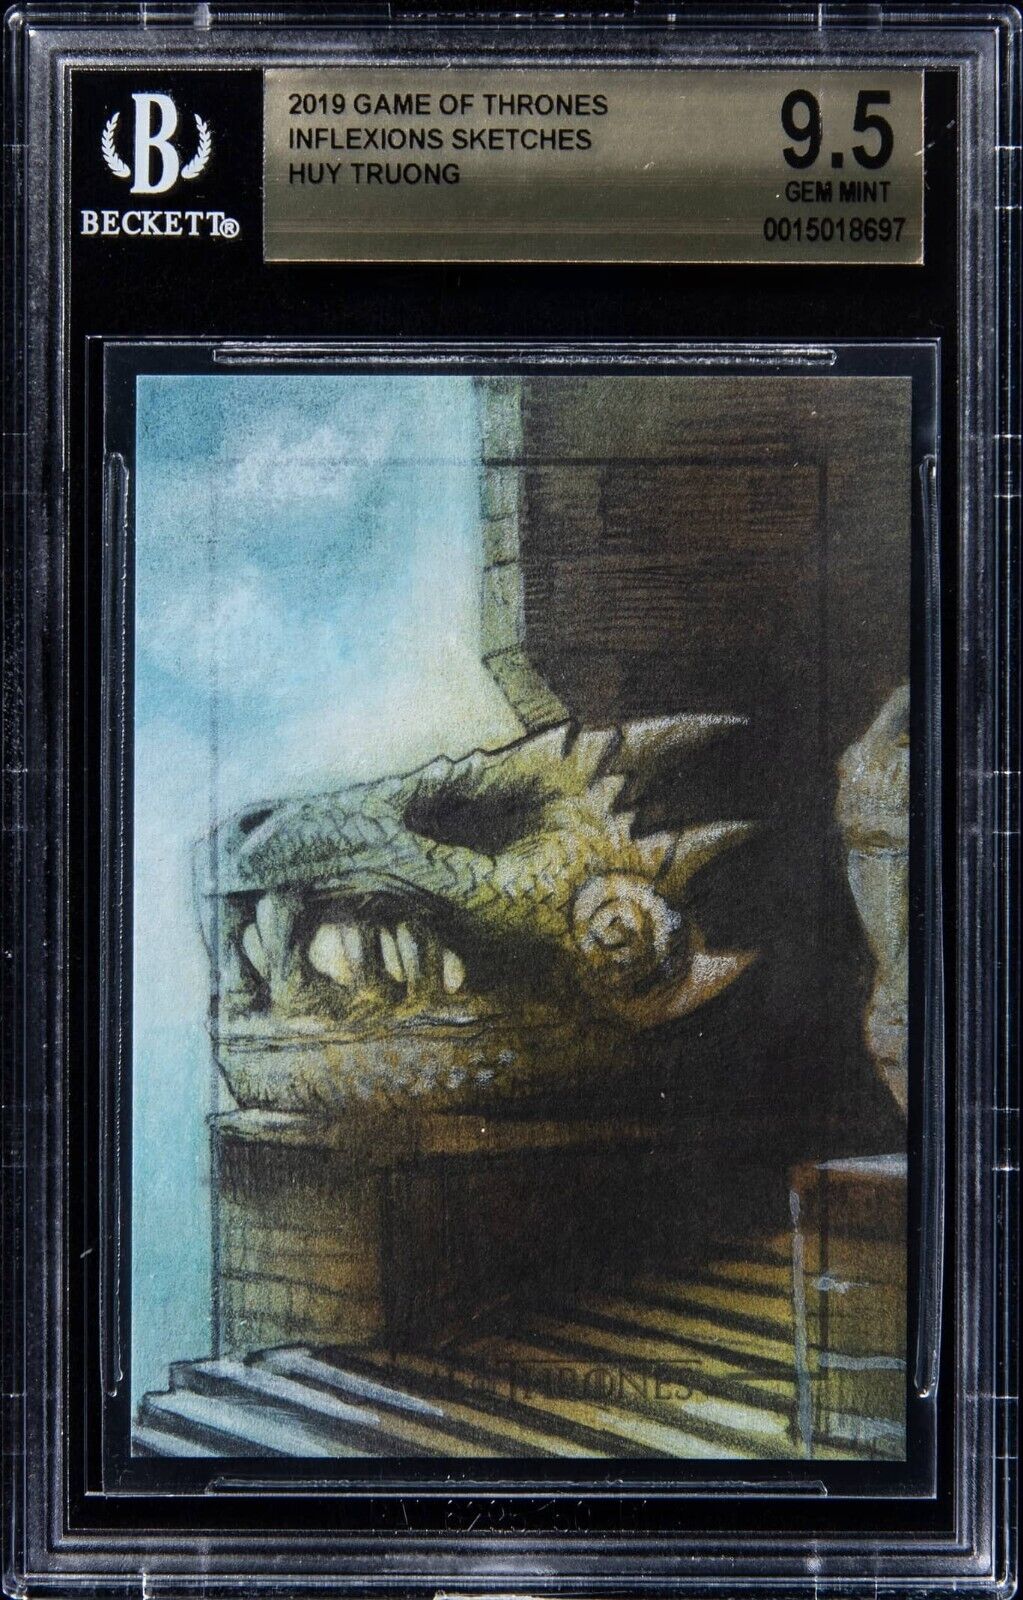 2019 Rittenhouse Game of Thrones sketch SketchaFEX by Huy Truong BGS 9.5